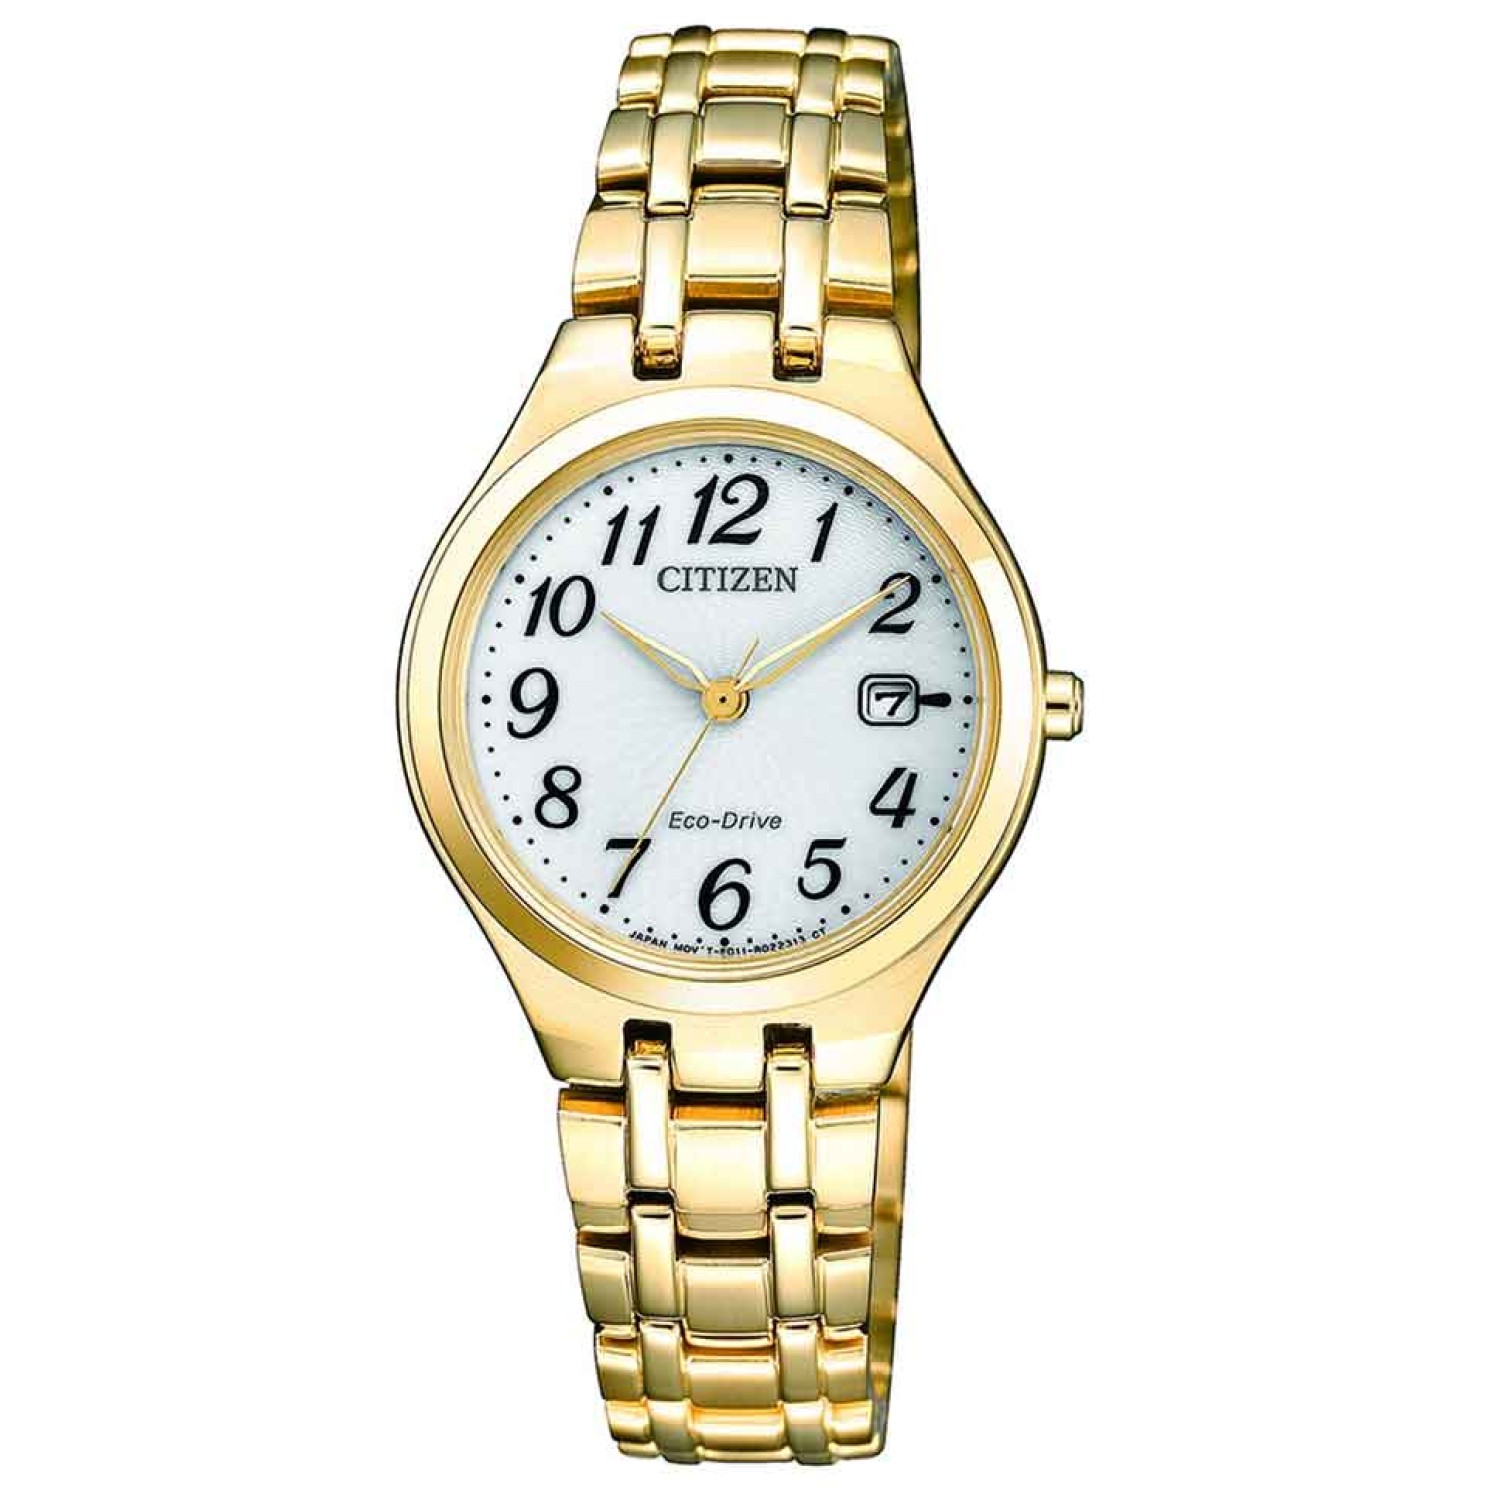 EW2482-53A Citizen Ladies Eco-drive Solar Watch. Harnessing light energy that powers this watch, Eco-Drive Technology removes the need for batteries, cutting down on expense and inconvenience while comfortably reducing weight.